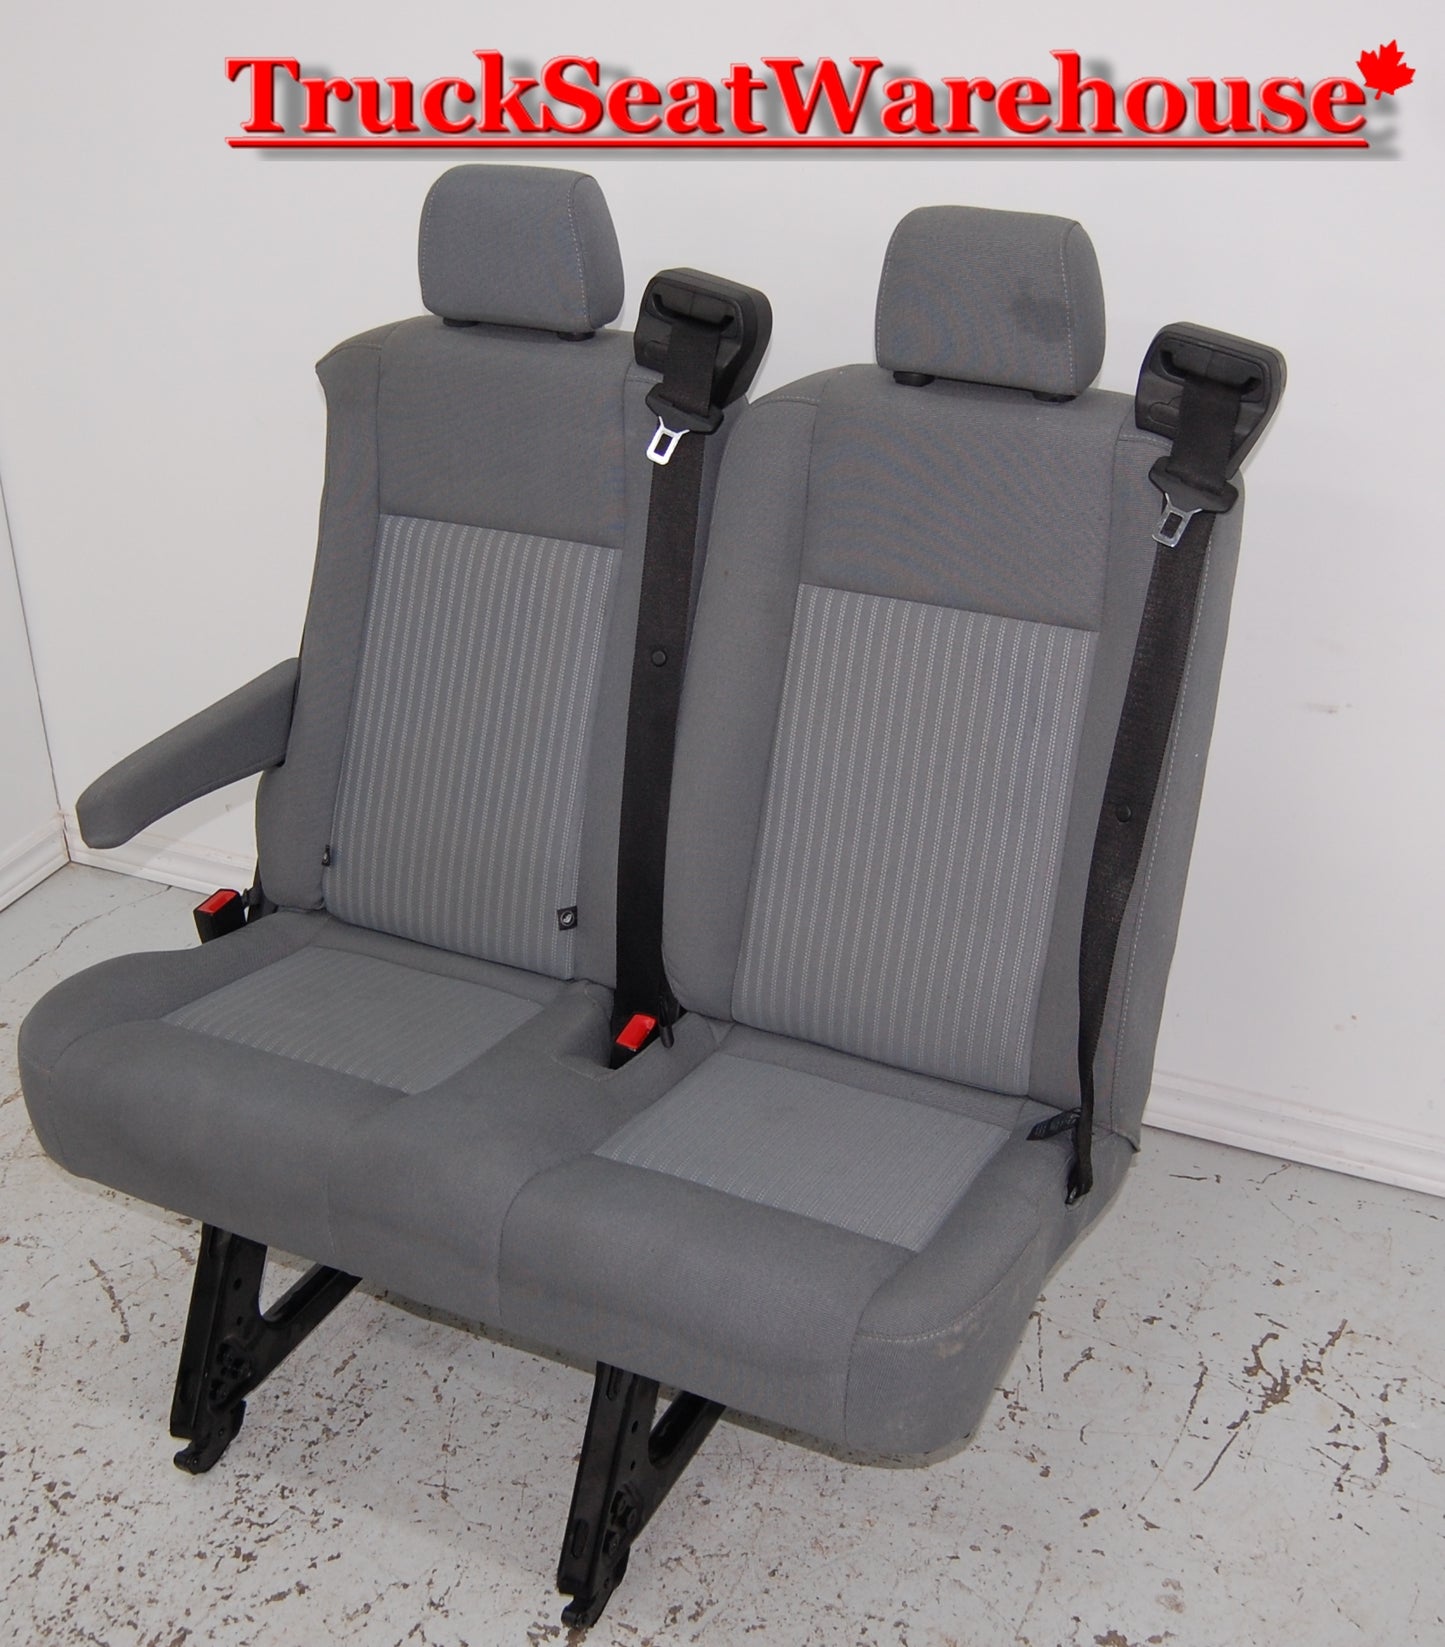 Ford Transit van 2017 2018 2019 36 inch wide 2 position bench seat with mounts grey cloth removable